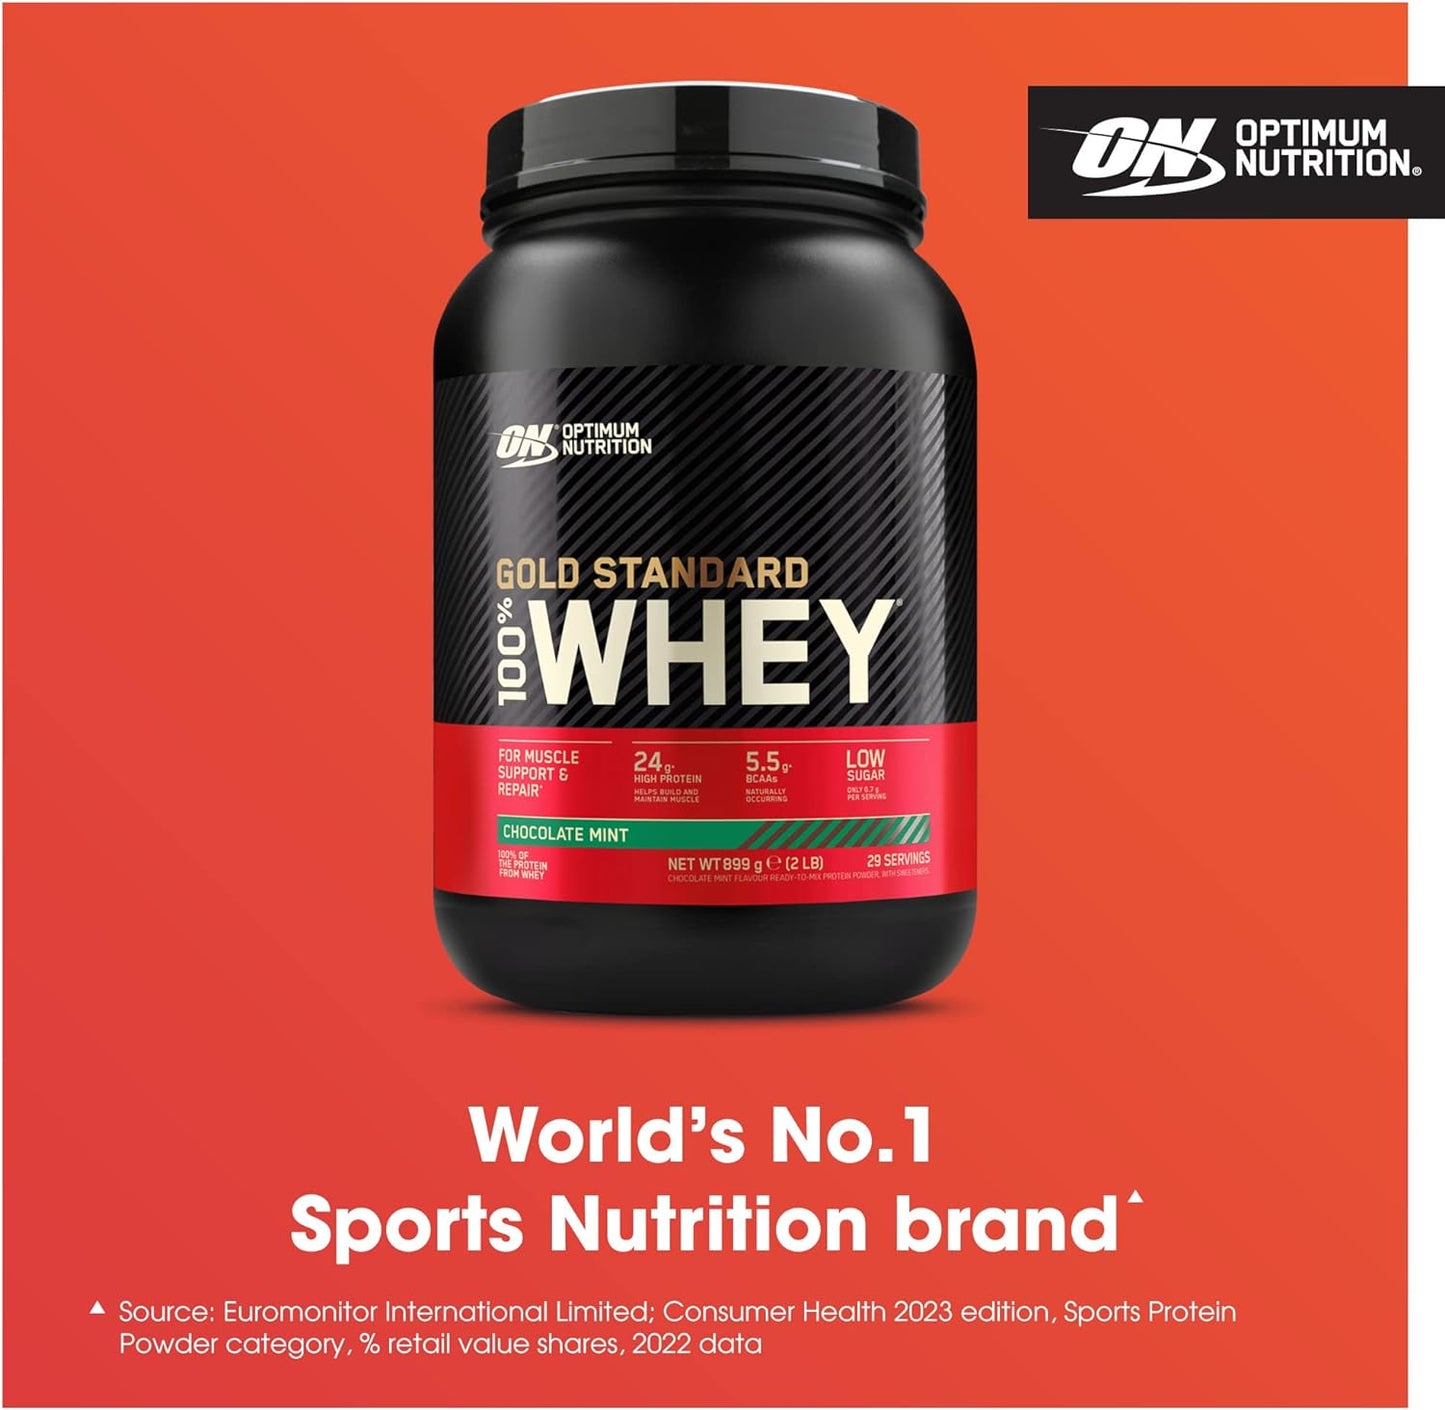 Gold Standard 100% Whey Muscle Building and Recovery Protein Powder with Naturally Occurring Glutamine and BCAA Amino Acids, Chocolate Mint Flavour, 29 Servings, 899 G